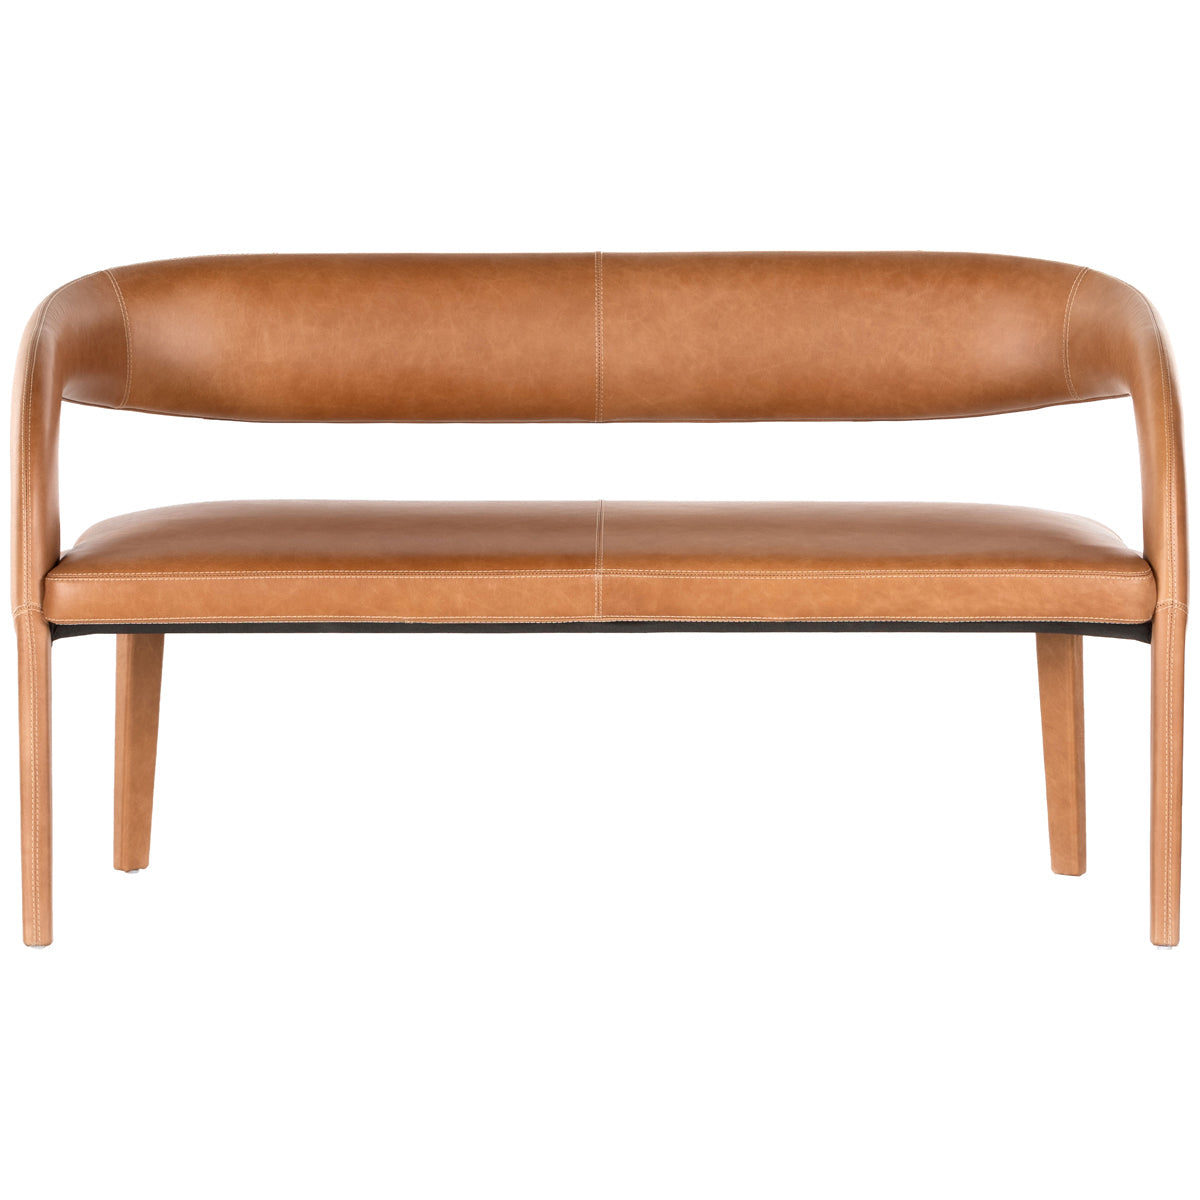 Four Hands Townsend Hawkins Leather Dining Bench - Sonoma Butterscotch